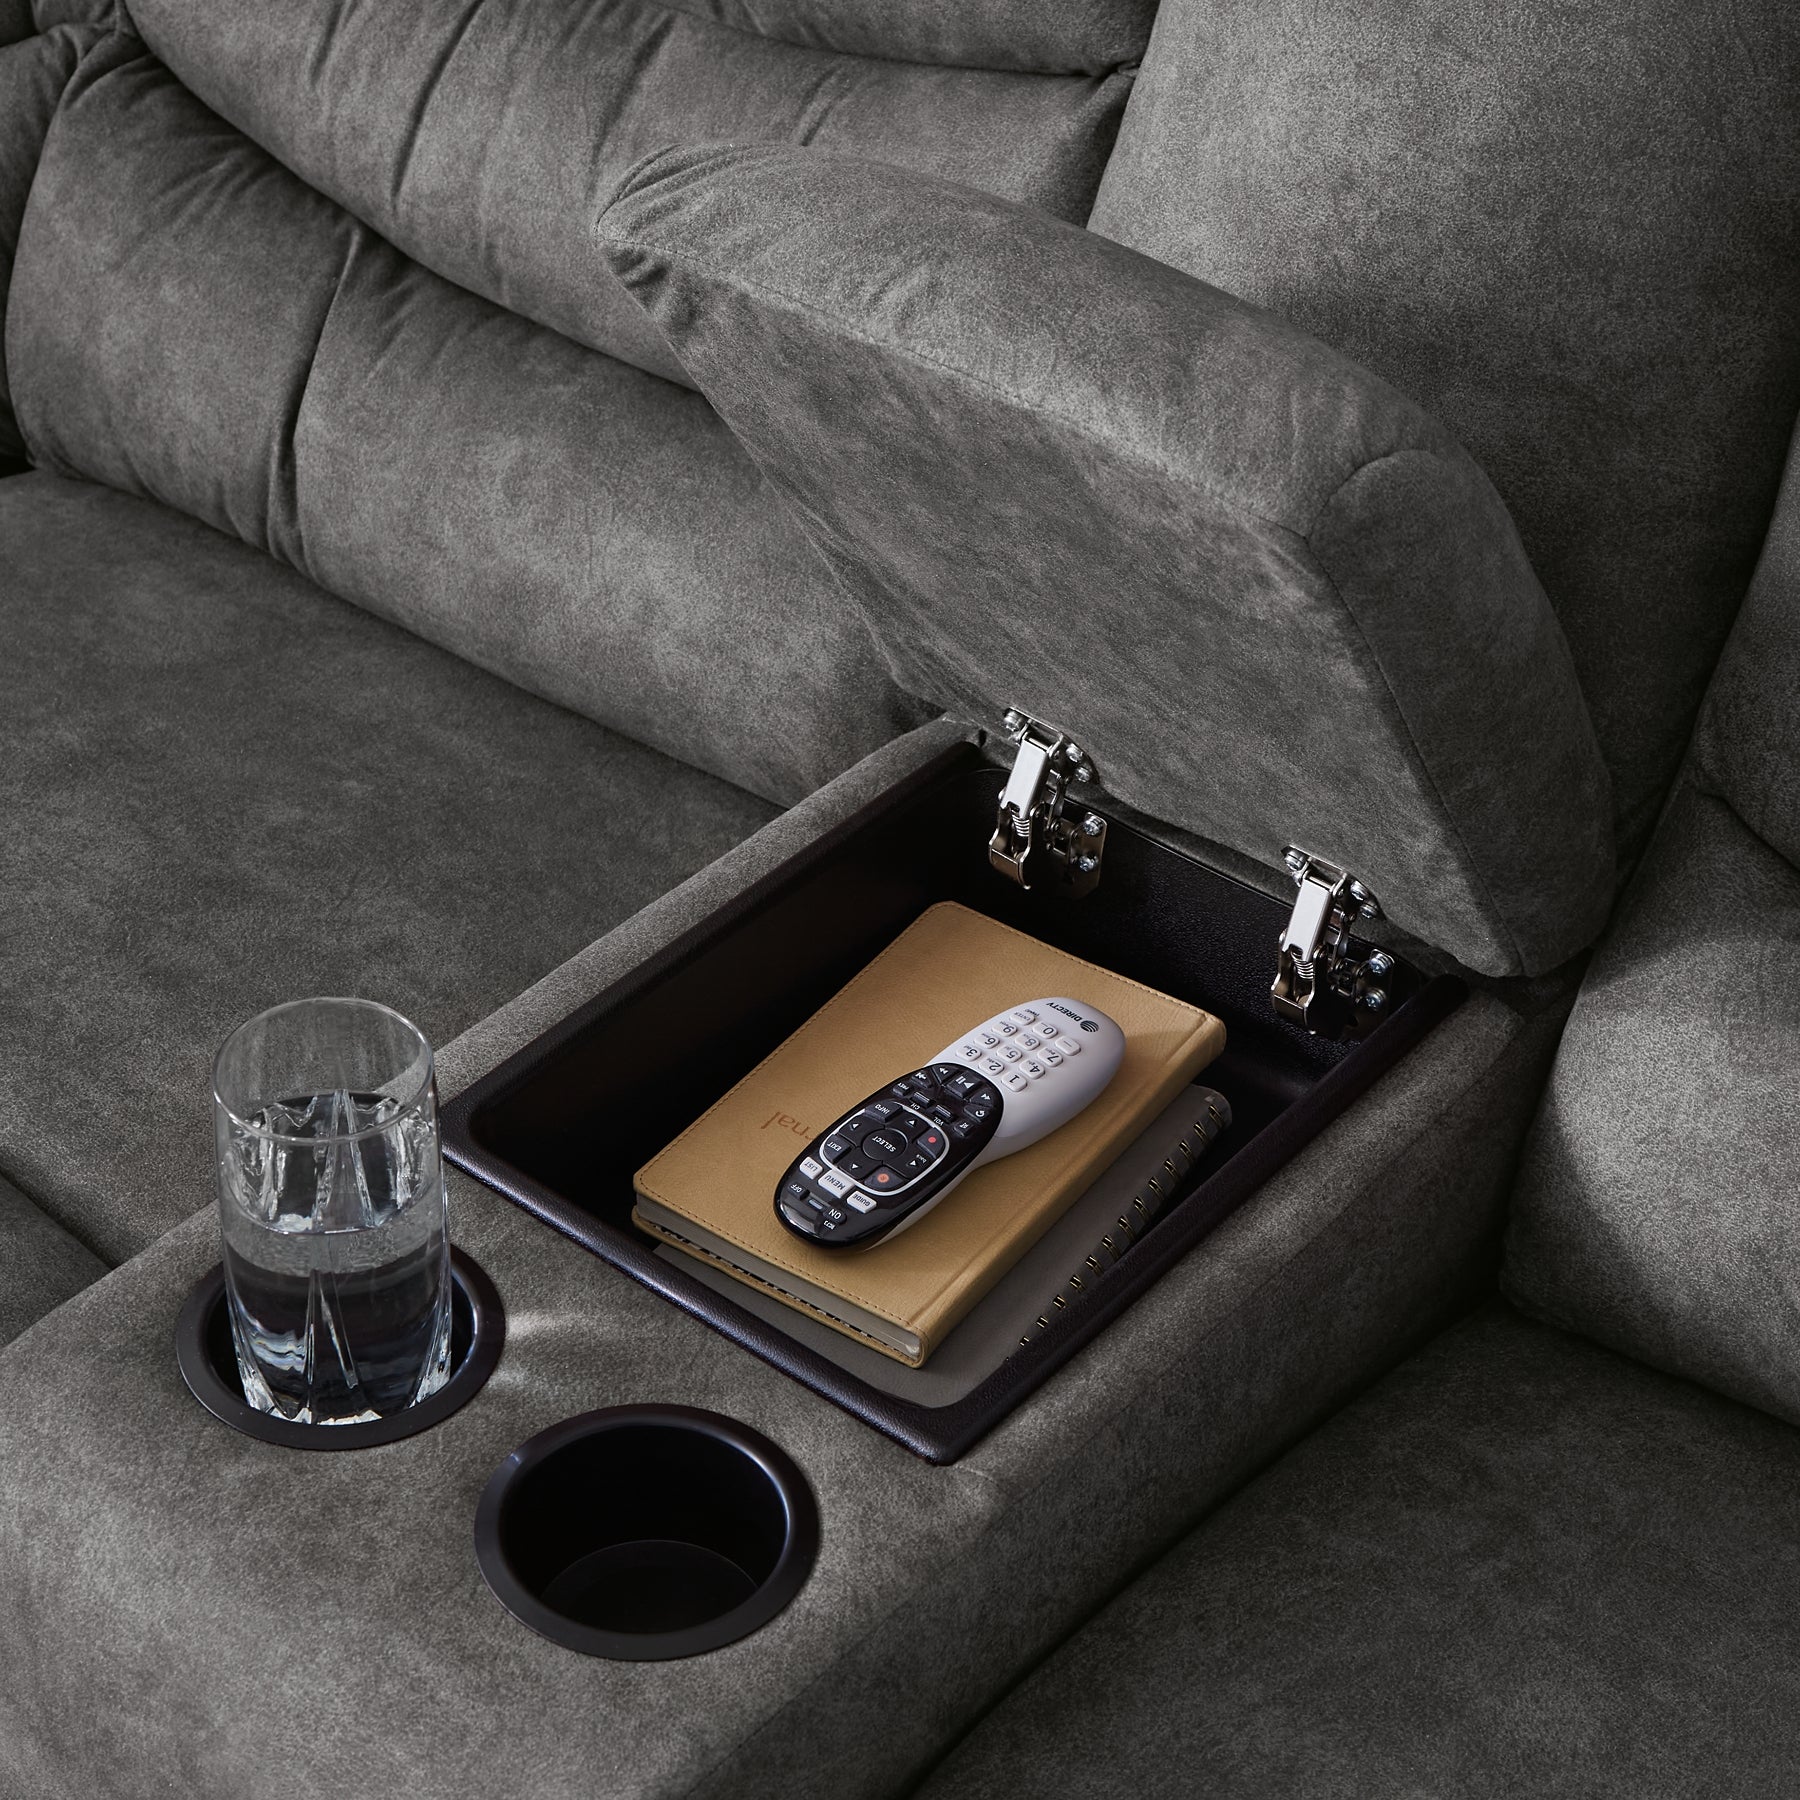 Partymate 2-Piece Reclining Sectional Signature Design by Ashley®